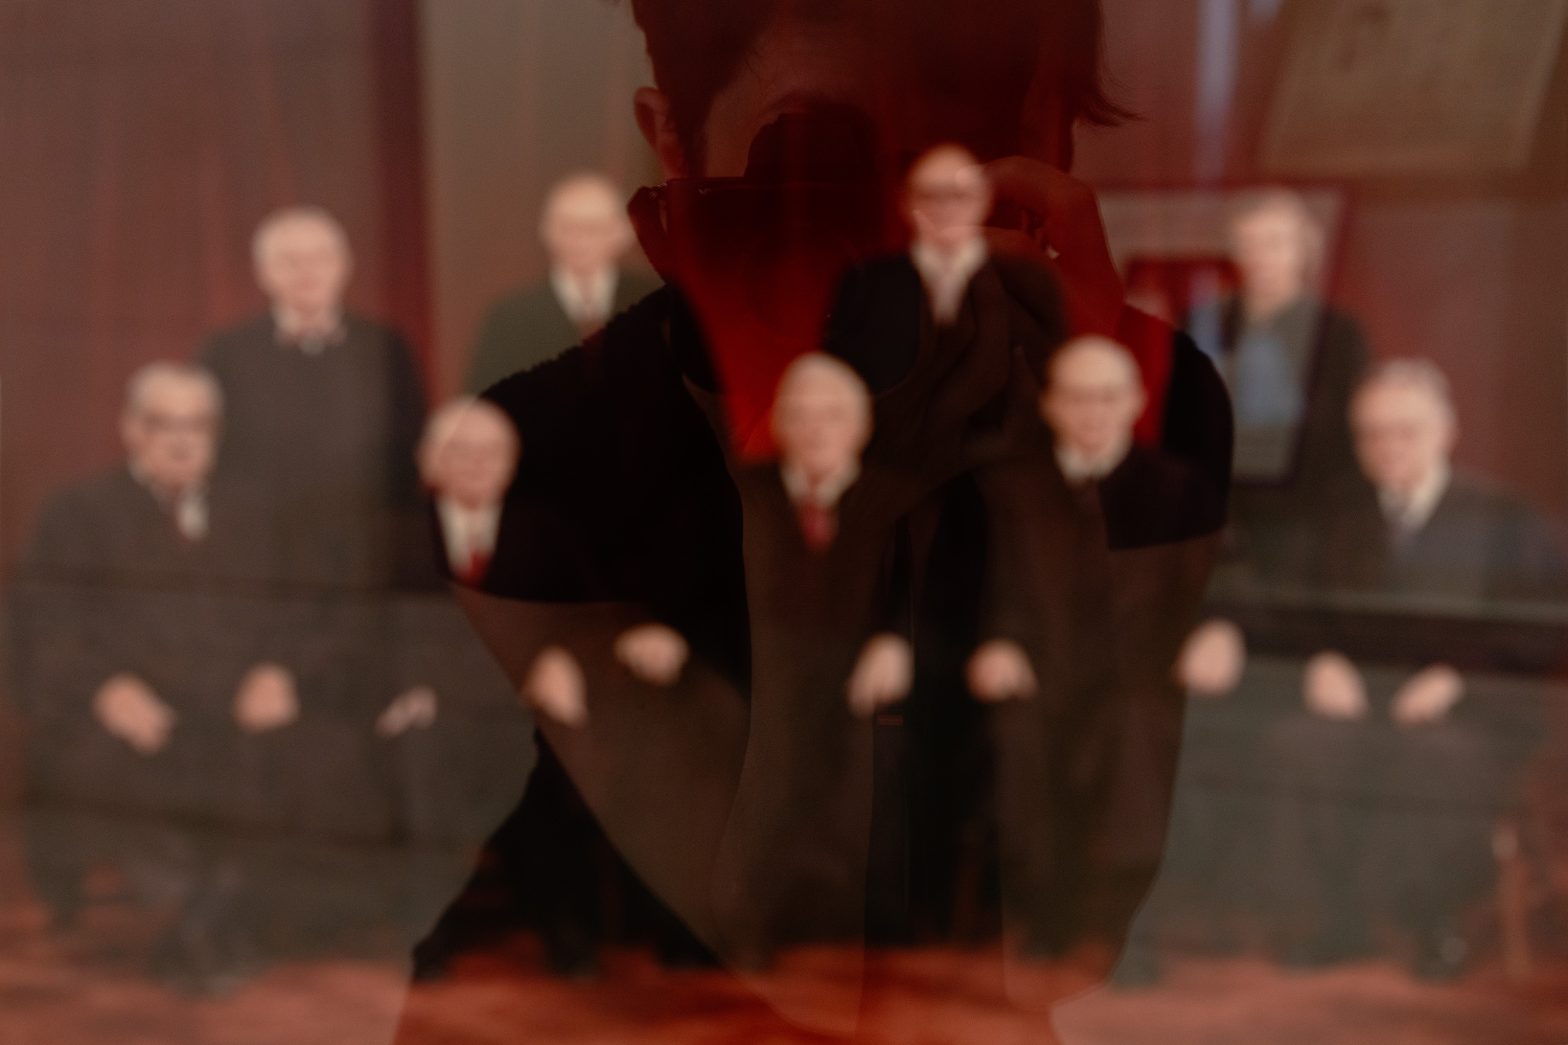 Group of formally dressed judges, featuring eight men and one woman against a red background. The image is overlaid with a reflection of the artist Carey Young taking a photograph.